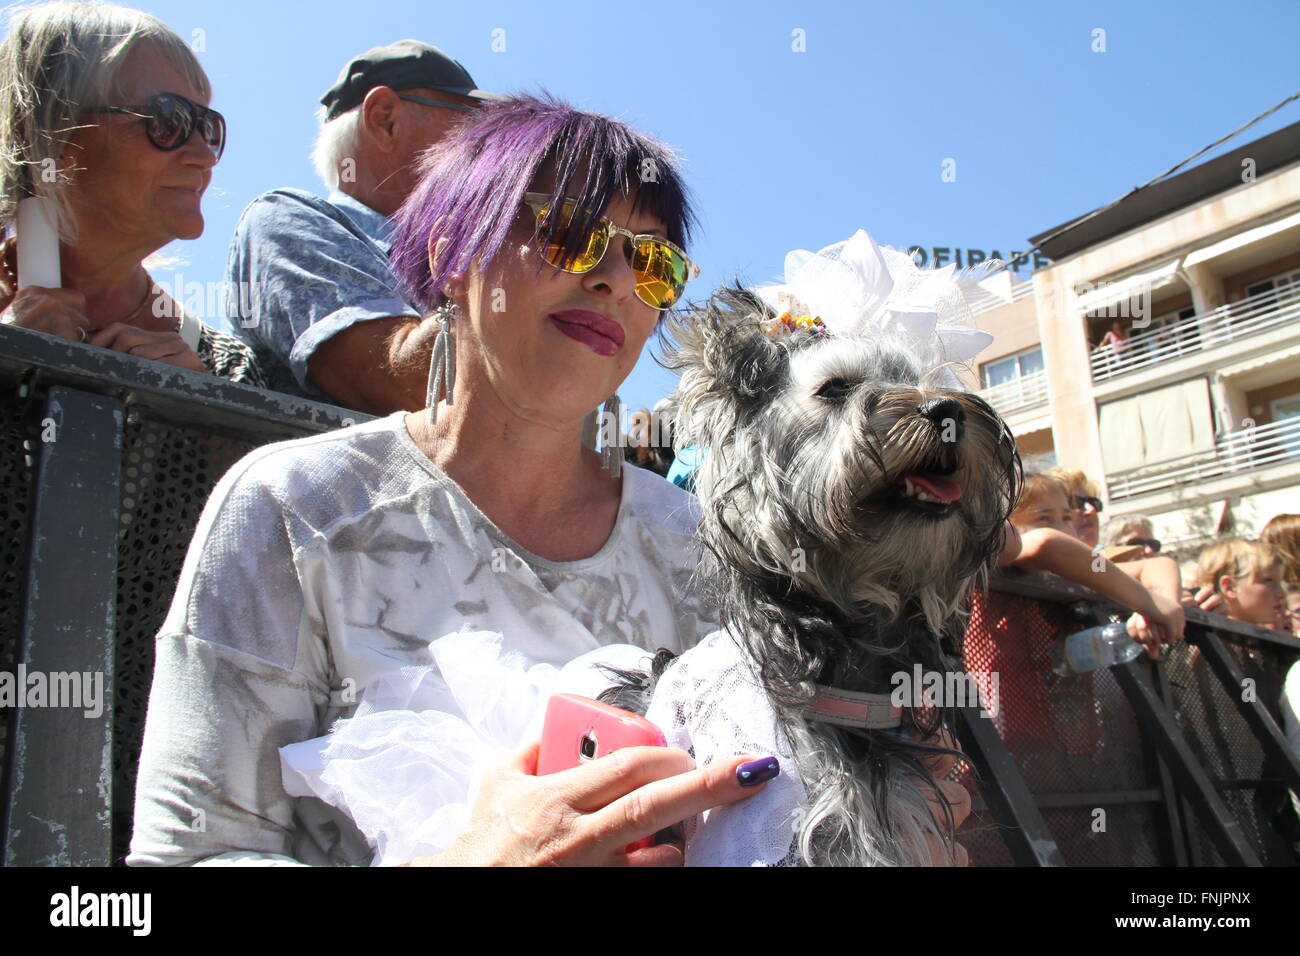 Tenerife, Spain. 13th Mar, 2016. An animal lover joins in the International Carnival of Los Cristianos with pet costume contest . Twelve candidates have passed on the main stage of the holidays. Sebastian Yorkshire accompanied by Norely with the Surprise fantasy won the first prize. The second award went to the Chihuahua Goliath and his Unicorn Carnavalero who marched with Carla and Laura. And third, for Willy and Mila brothers, two shih tzu who came from the Star Wars accompanied by Rosario and Raul. © Mercedes Menendez/RoverImages/Pacific Press/Alamy Live News Stock Photo